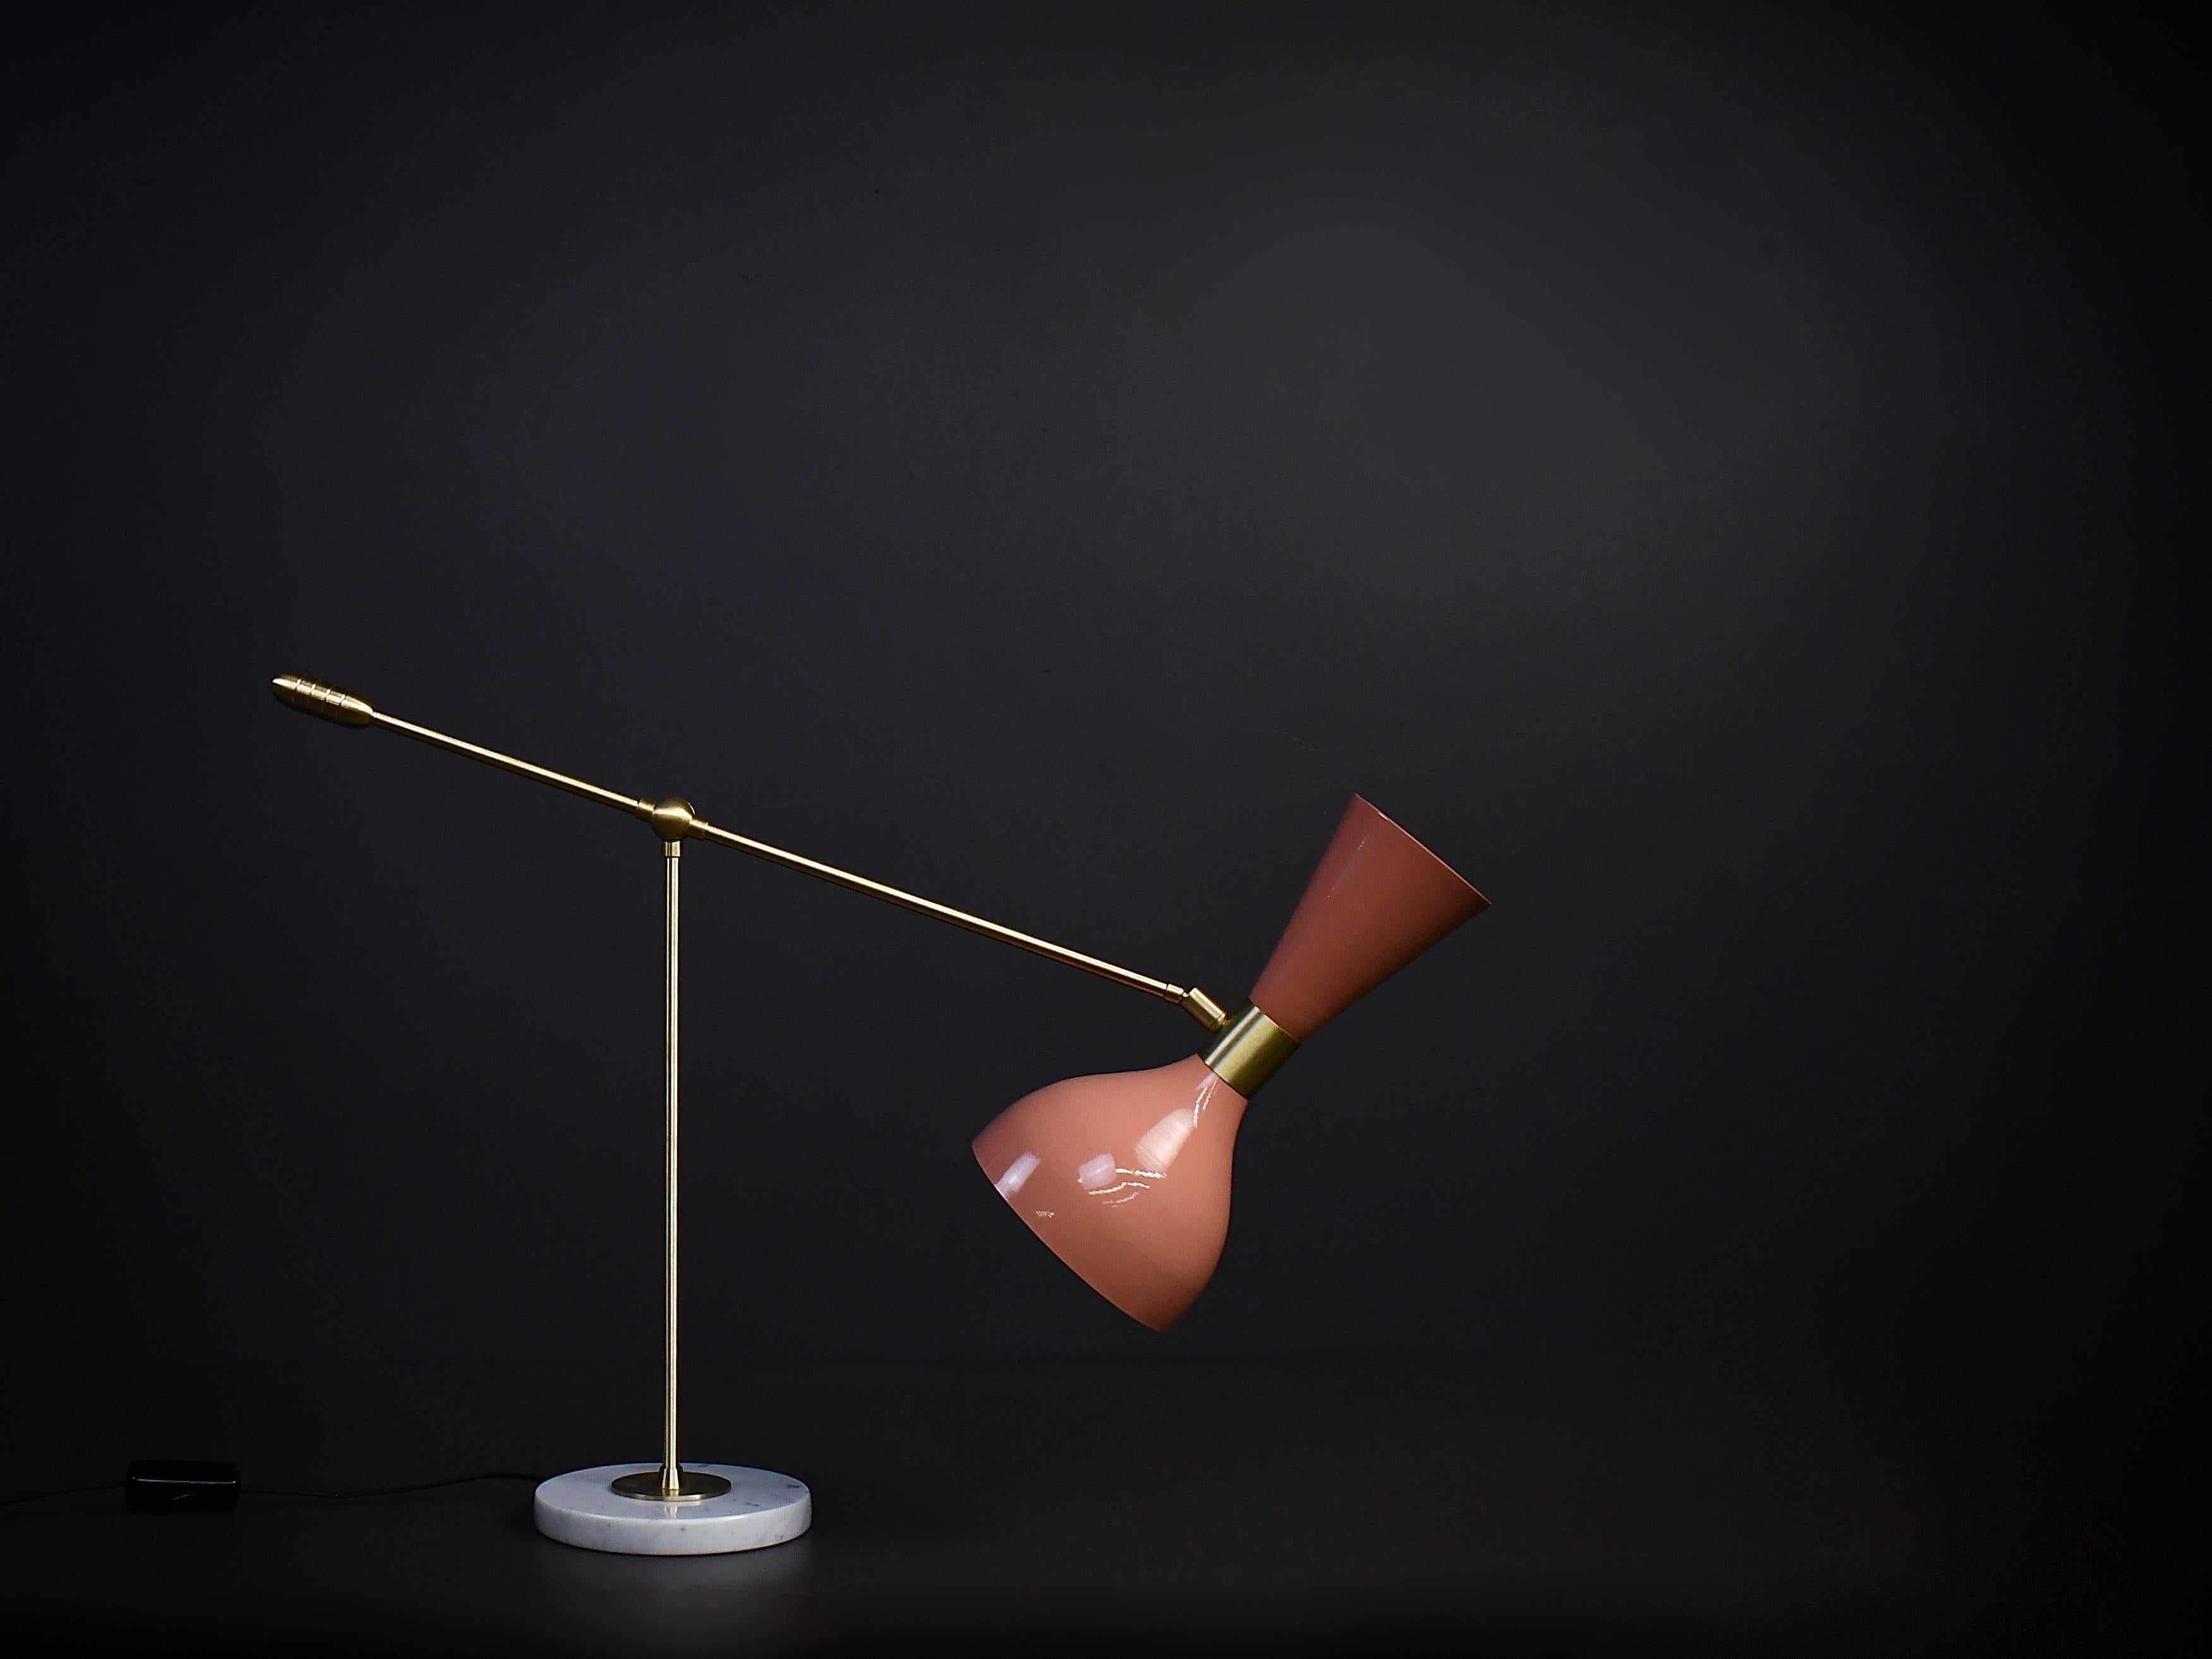 North American Ludo Desk Lamp or Table Lamp in Pink Enamel and Brass by Blueprint Lighting